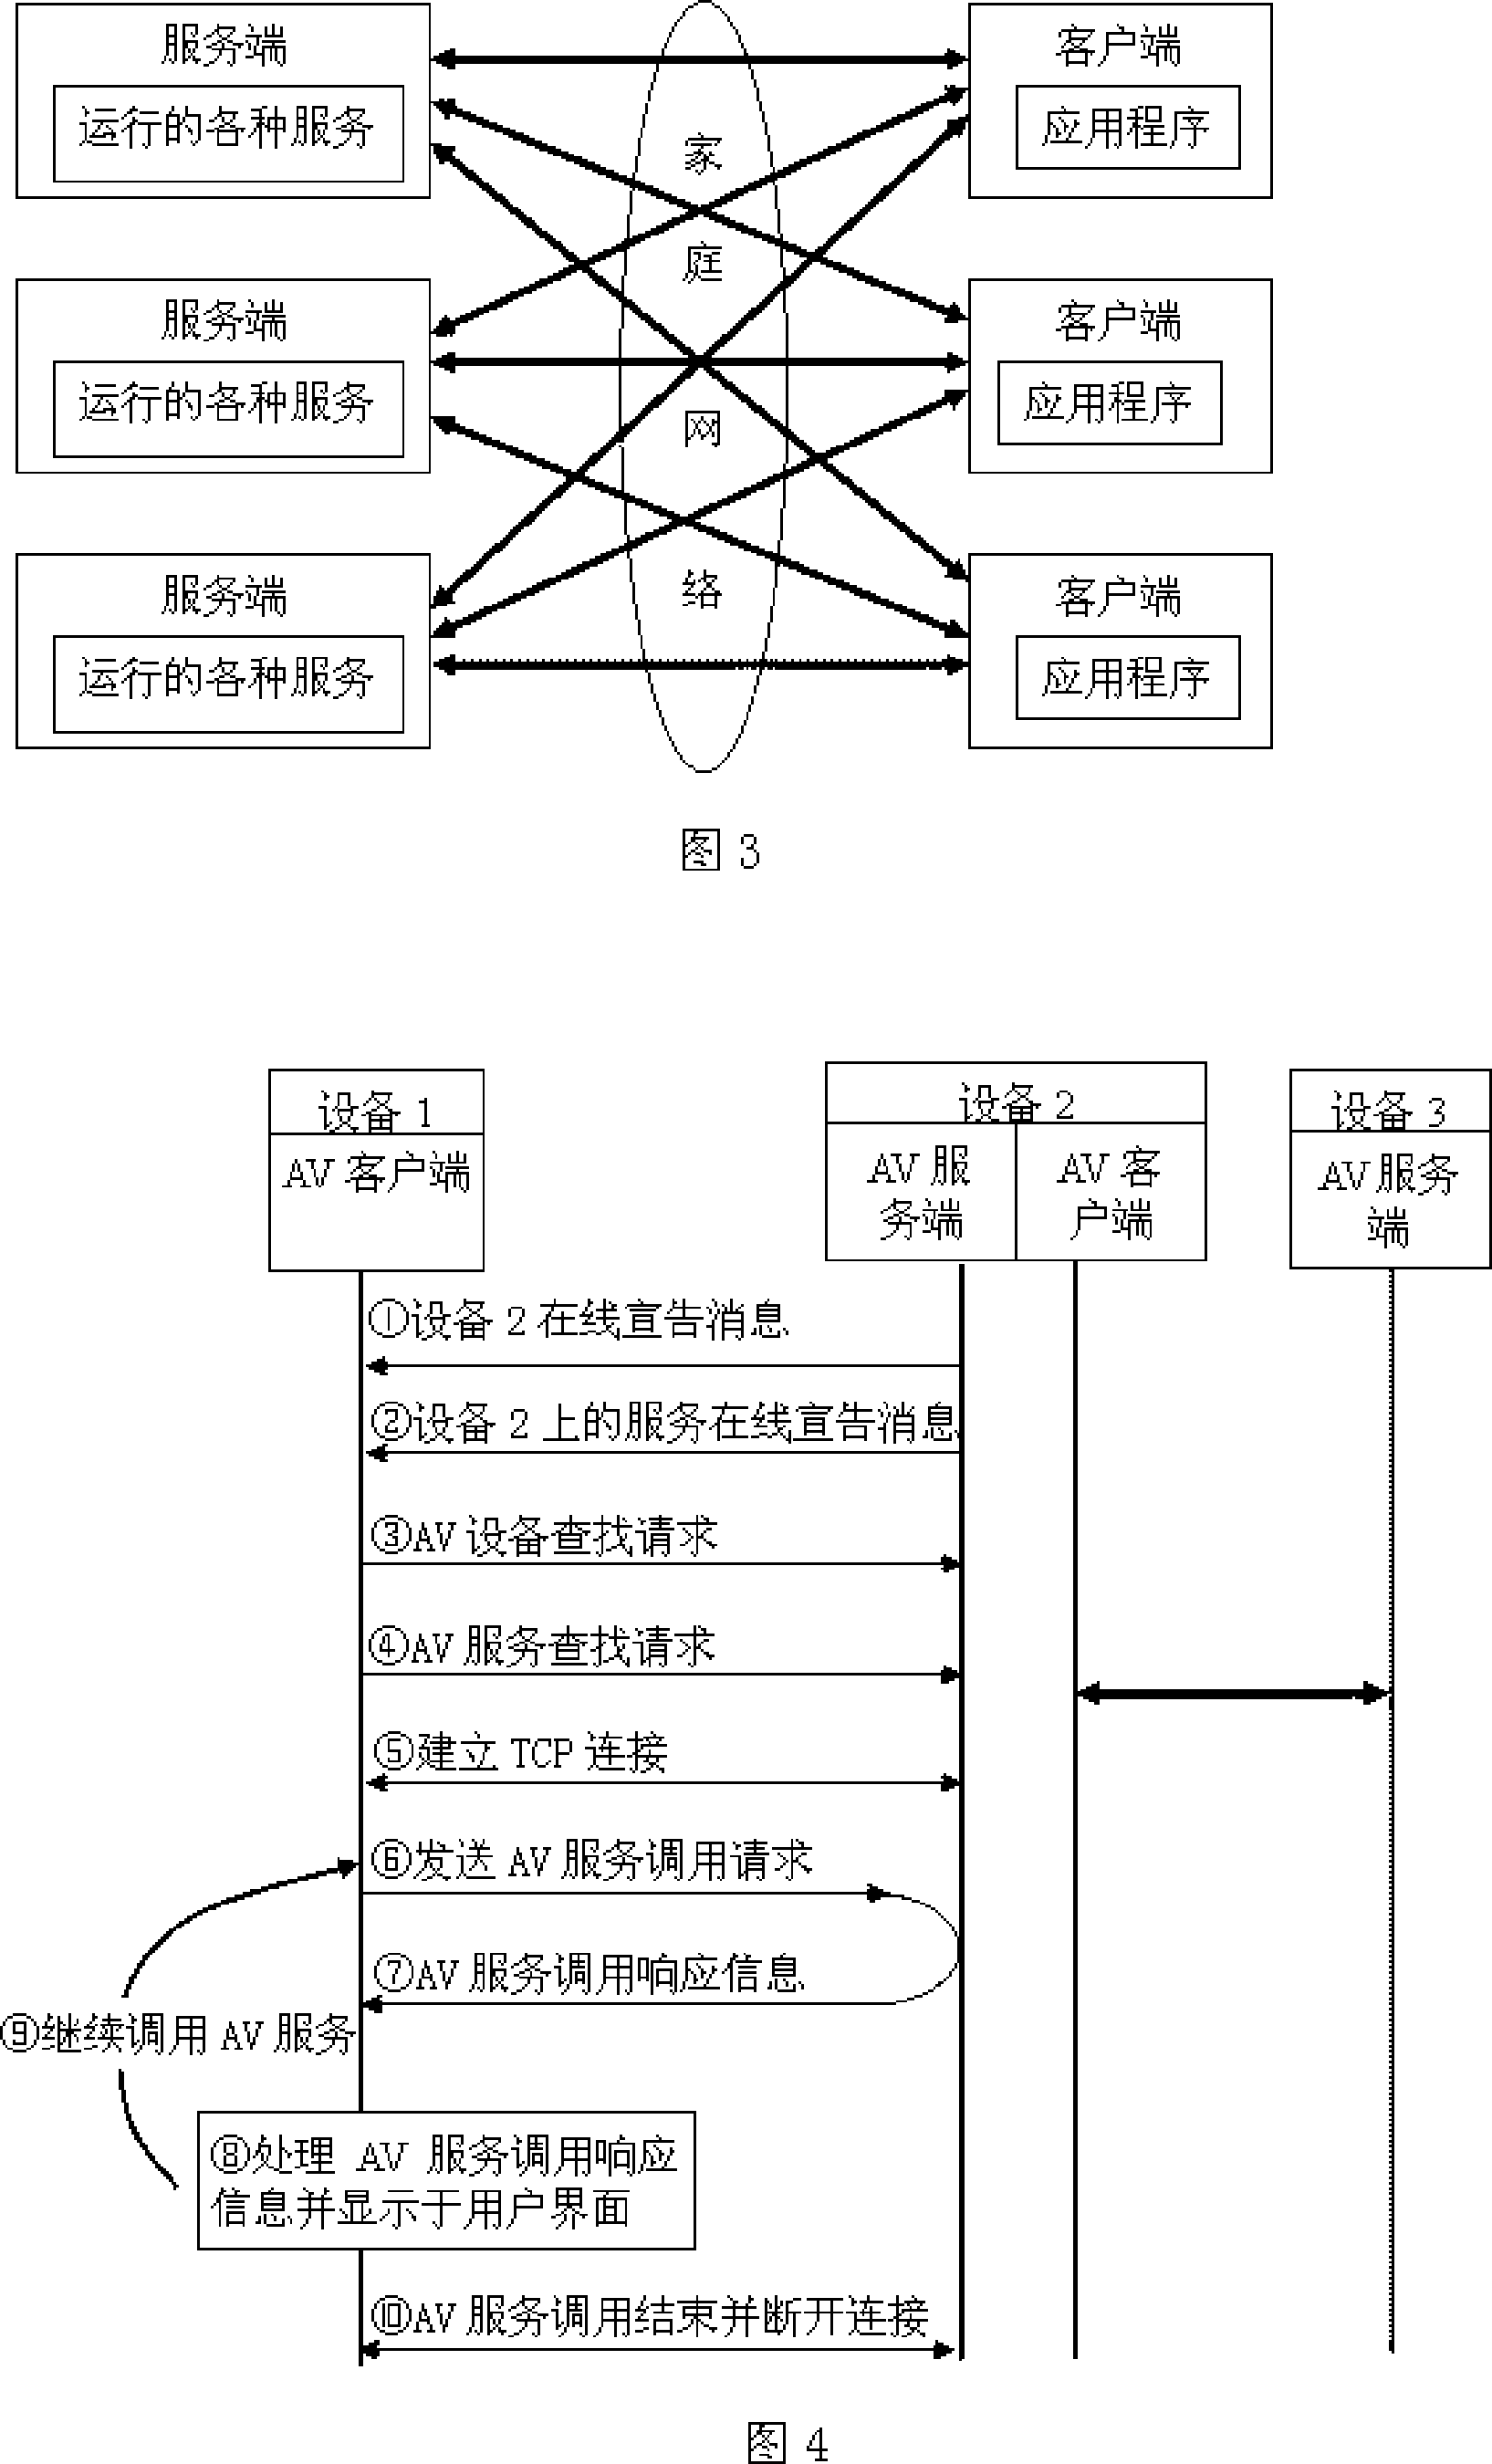 Service collaboration method between devices in home network